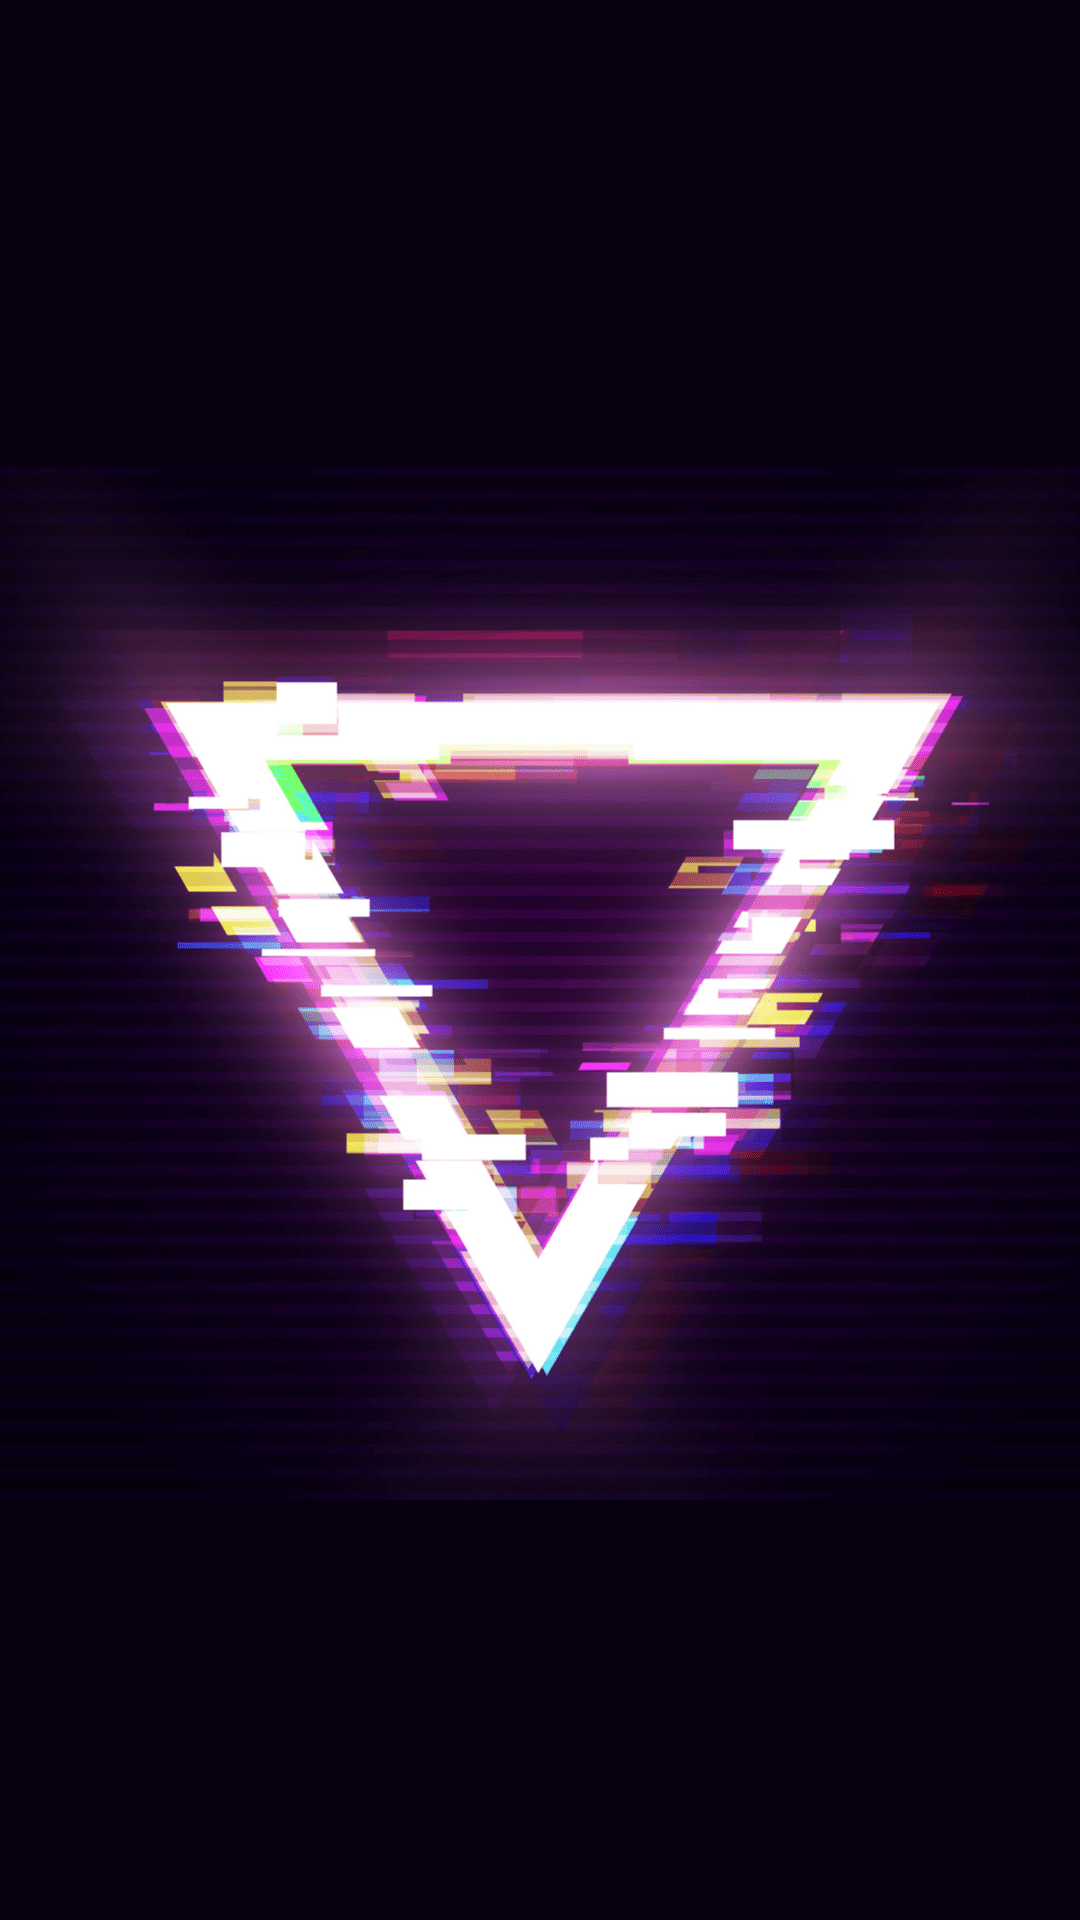 A neon triangle with lines and colorful light - Glitch